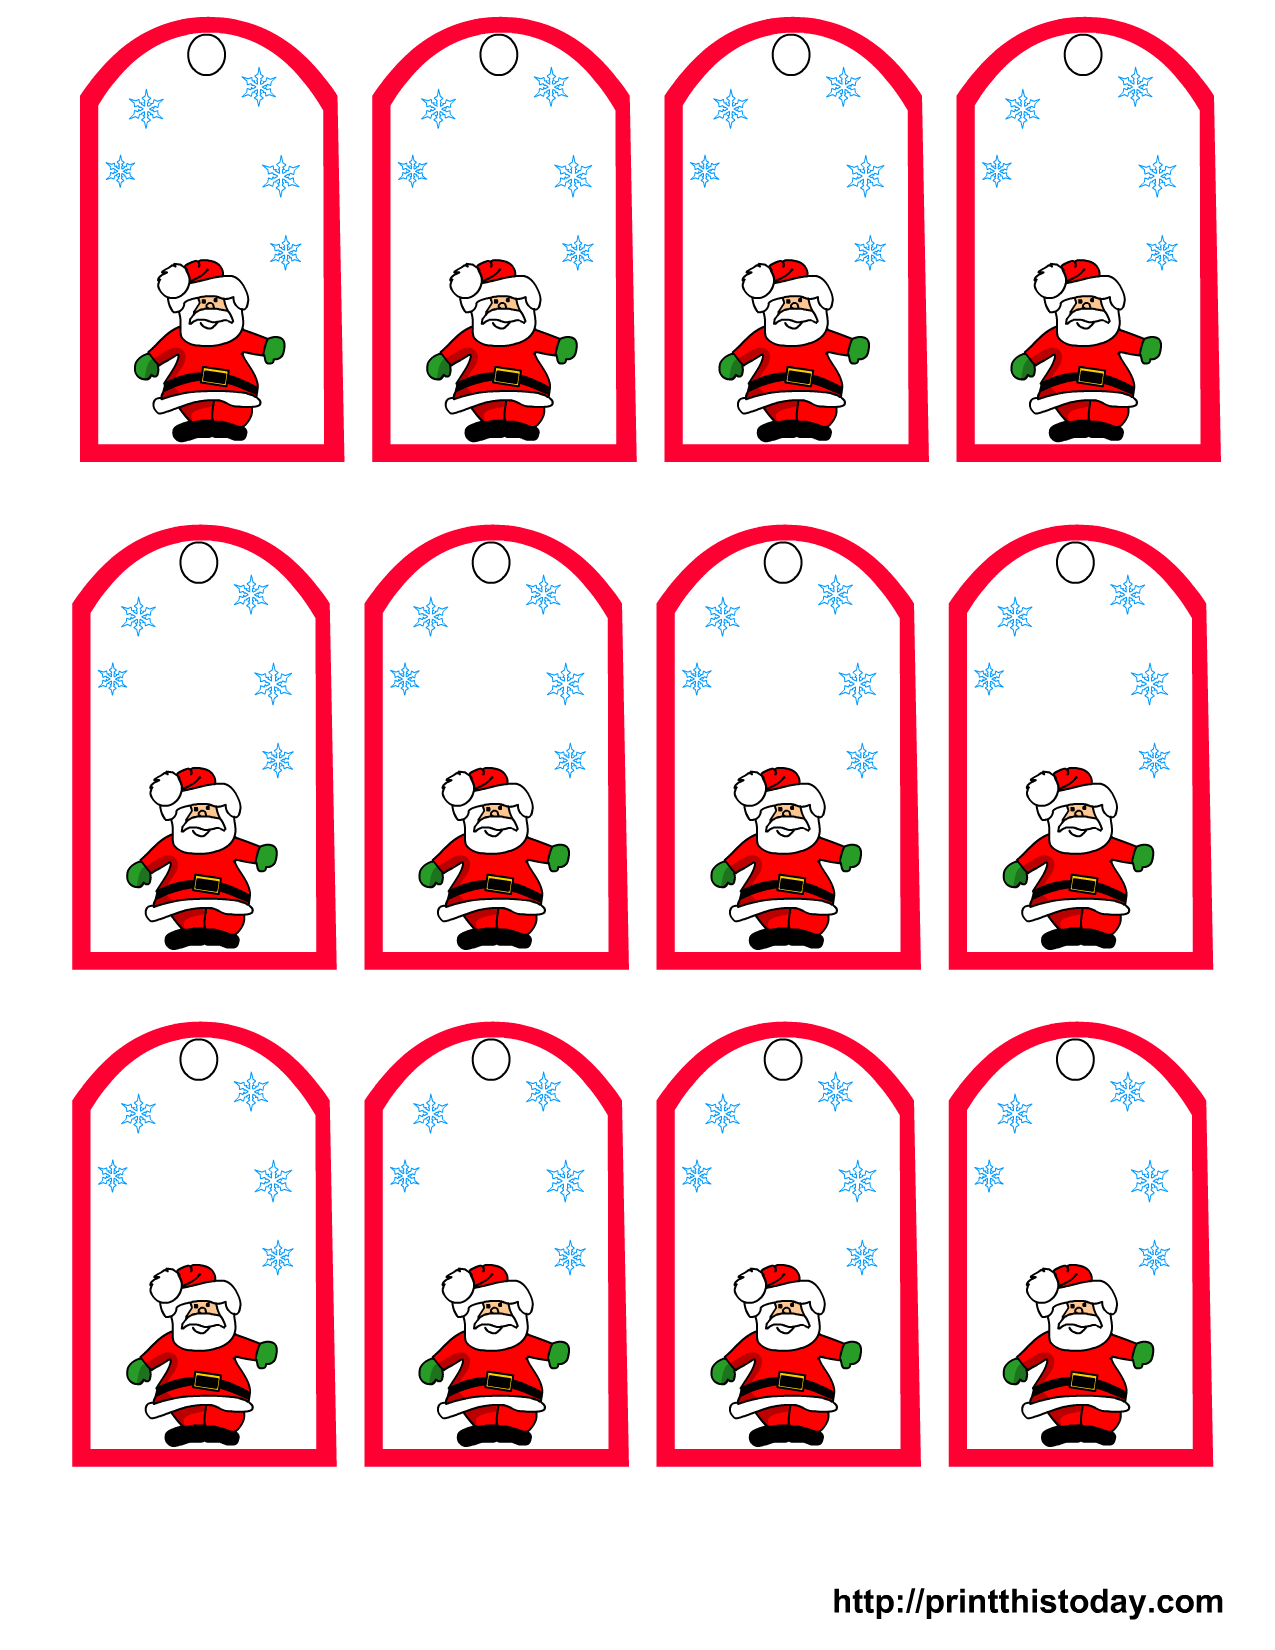 Editable From Santa Christmas Gift Tags, Holiday Secret Santa Gift Tags,  Customizable Christmas Gift Tags Instant Download id:5492832 